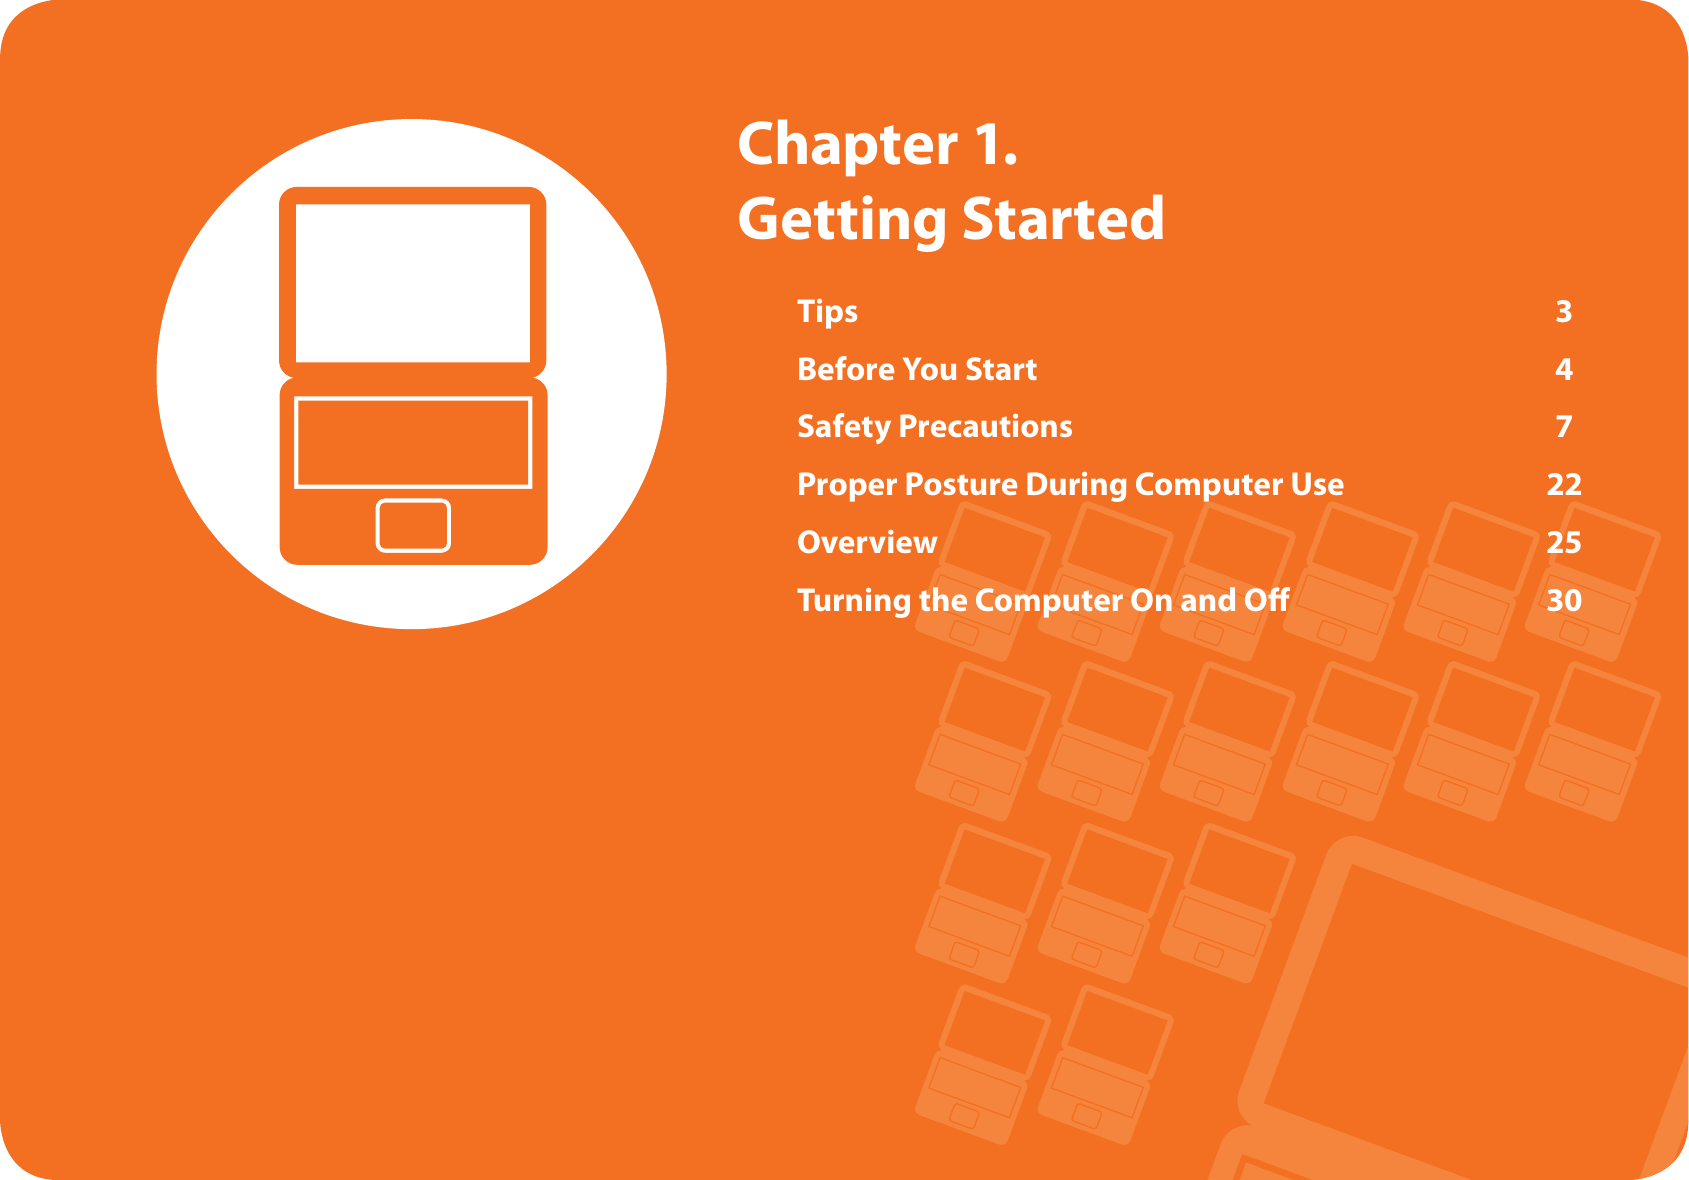 Tips 3Before You Start  4Safety Precautions  7Proper Posture During Computer Use  22Overview 25Turning the Computer On and Oﬀ   30  Chapter  1. Getting Started